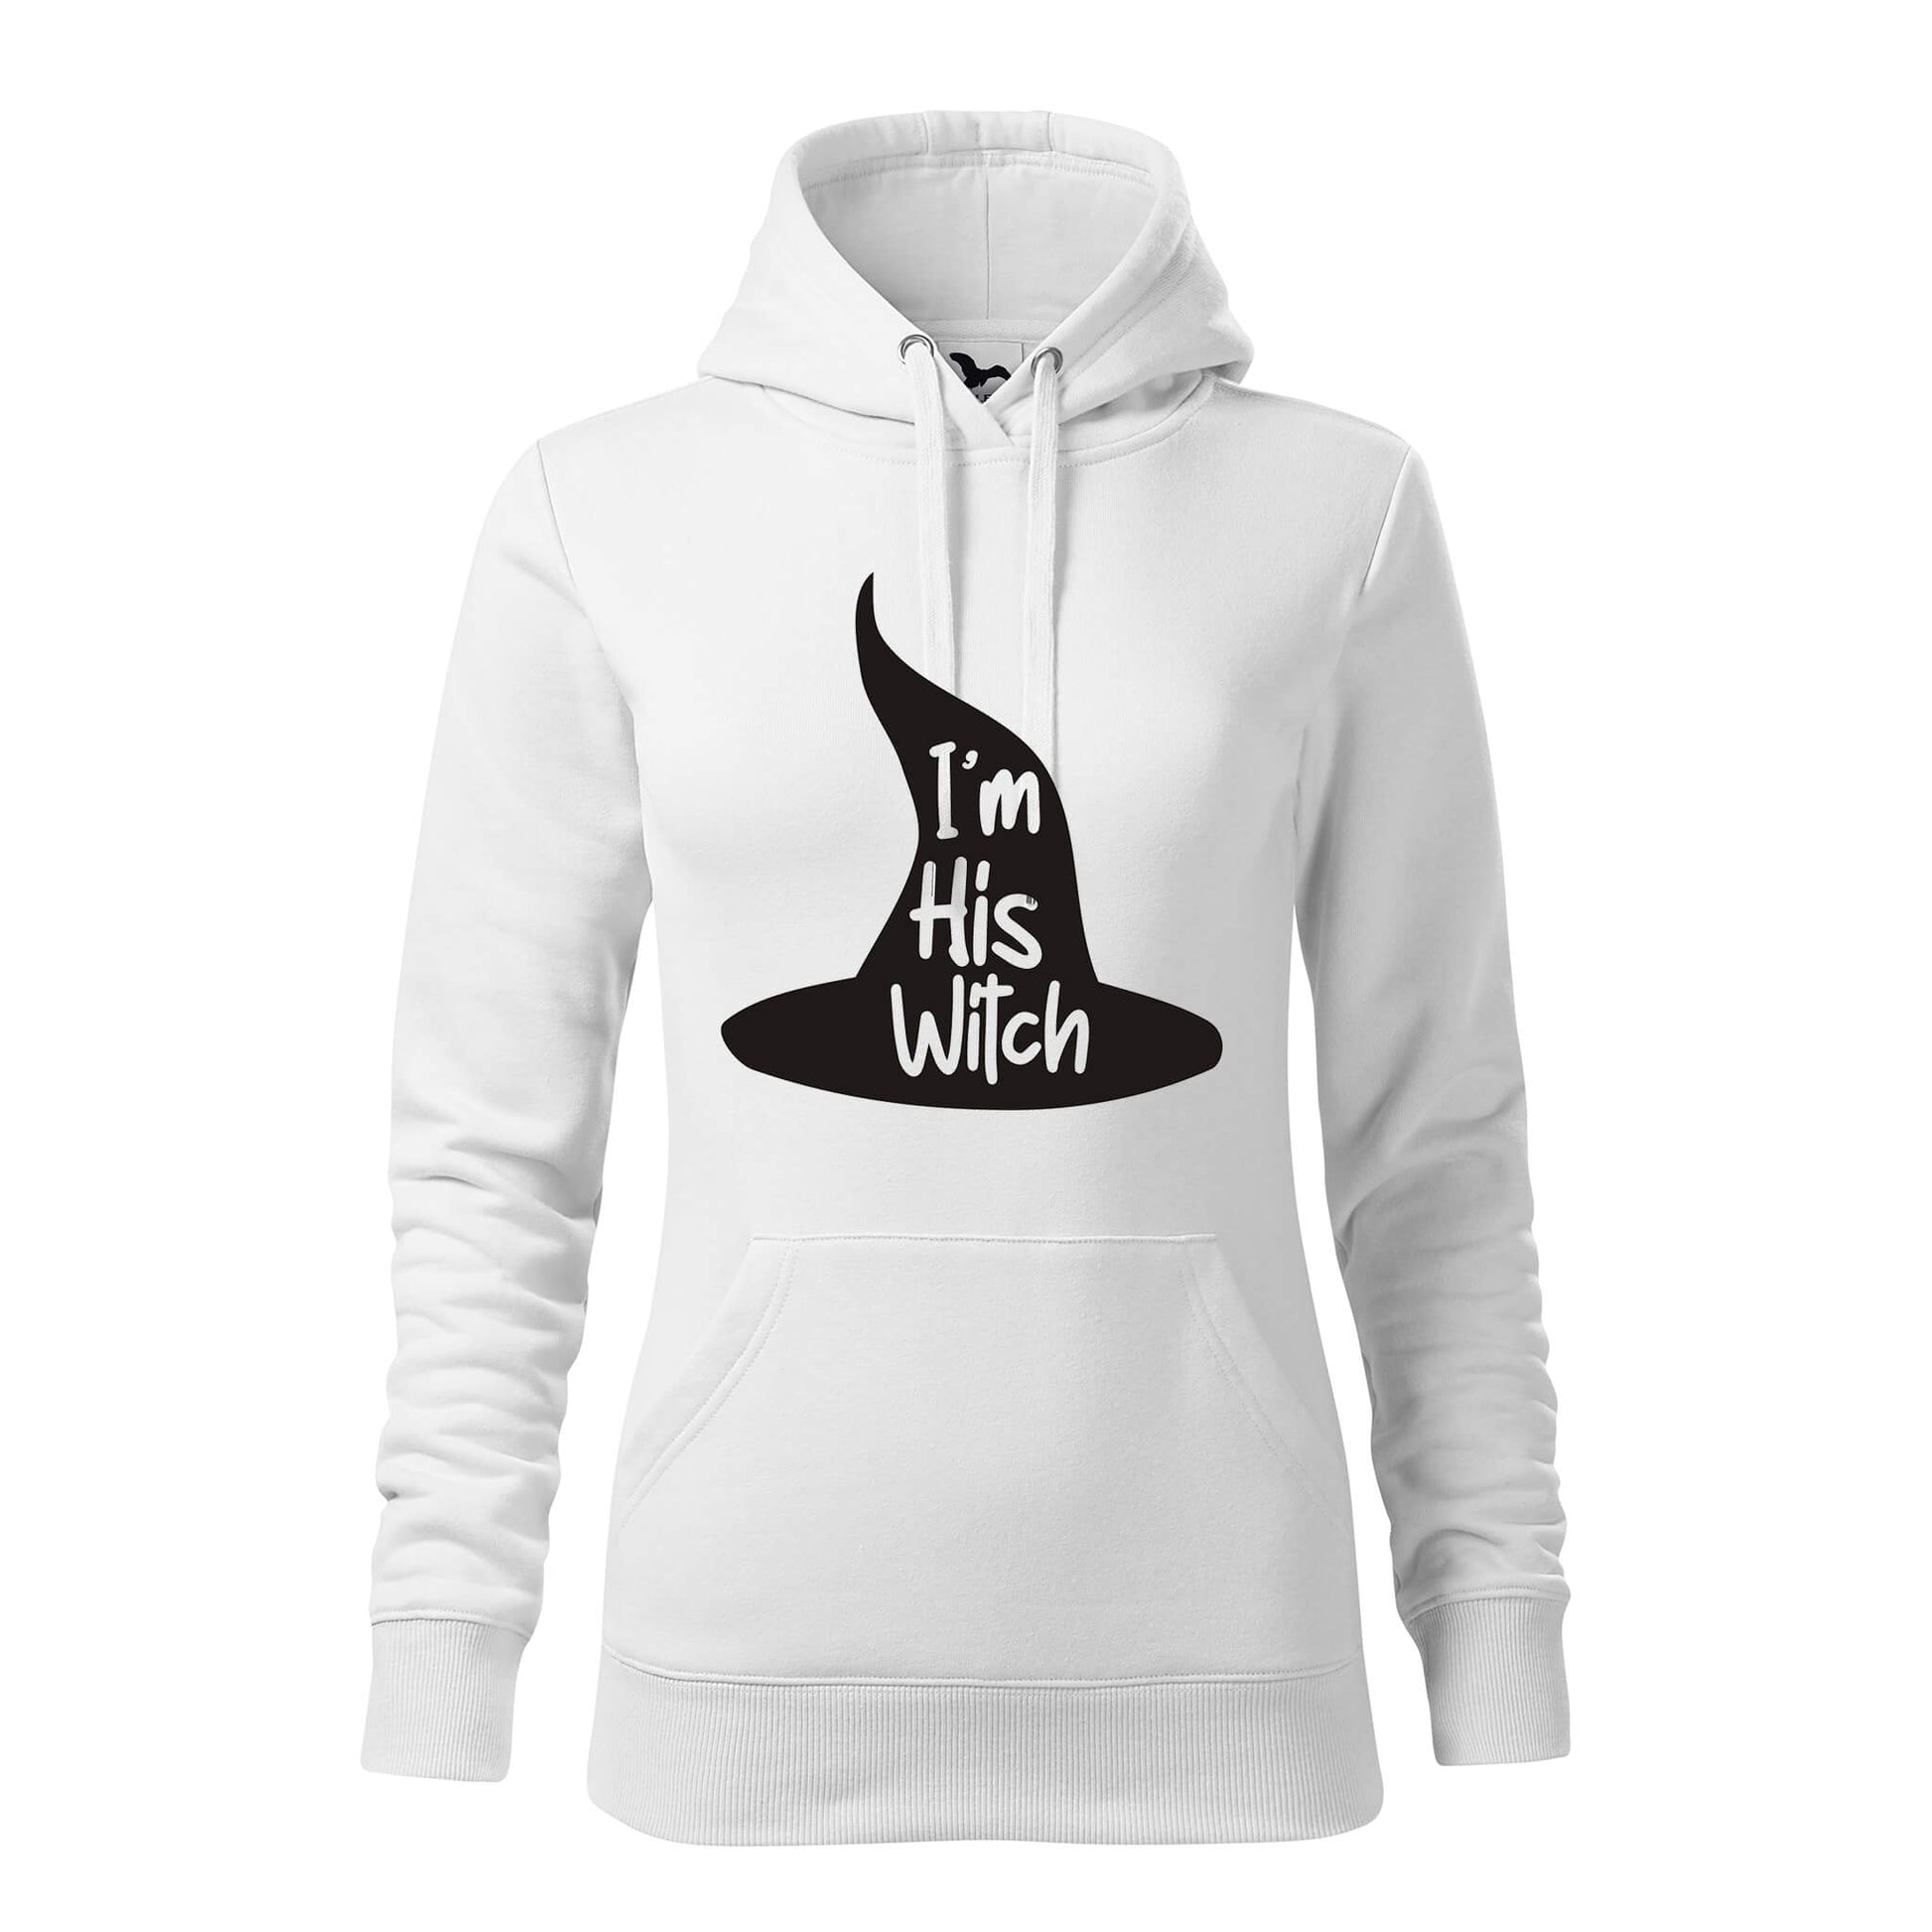 Im his witch hoodie - rvdesignprint